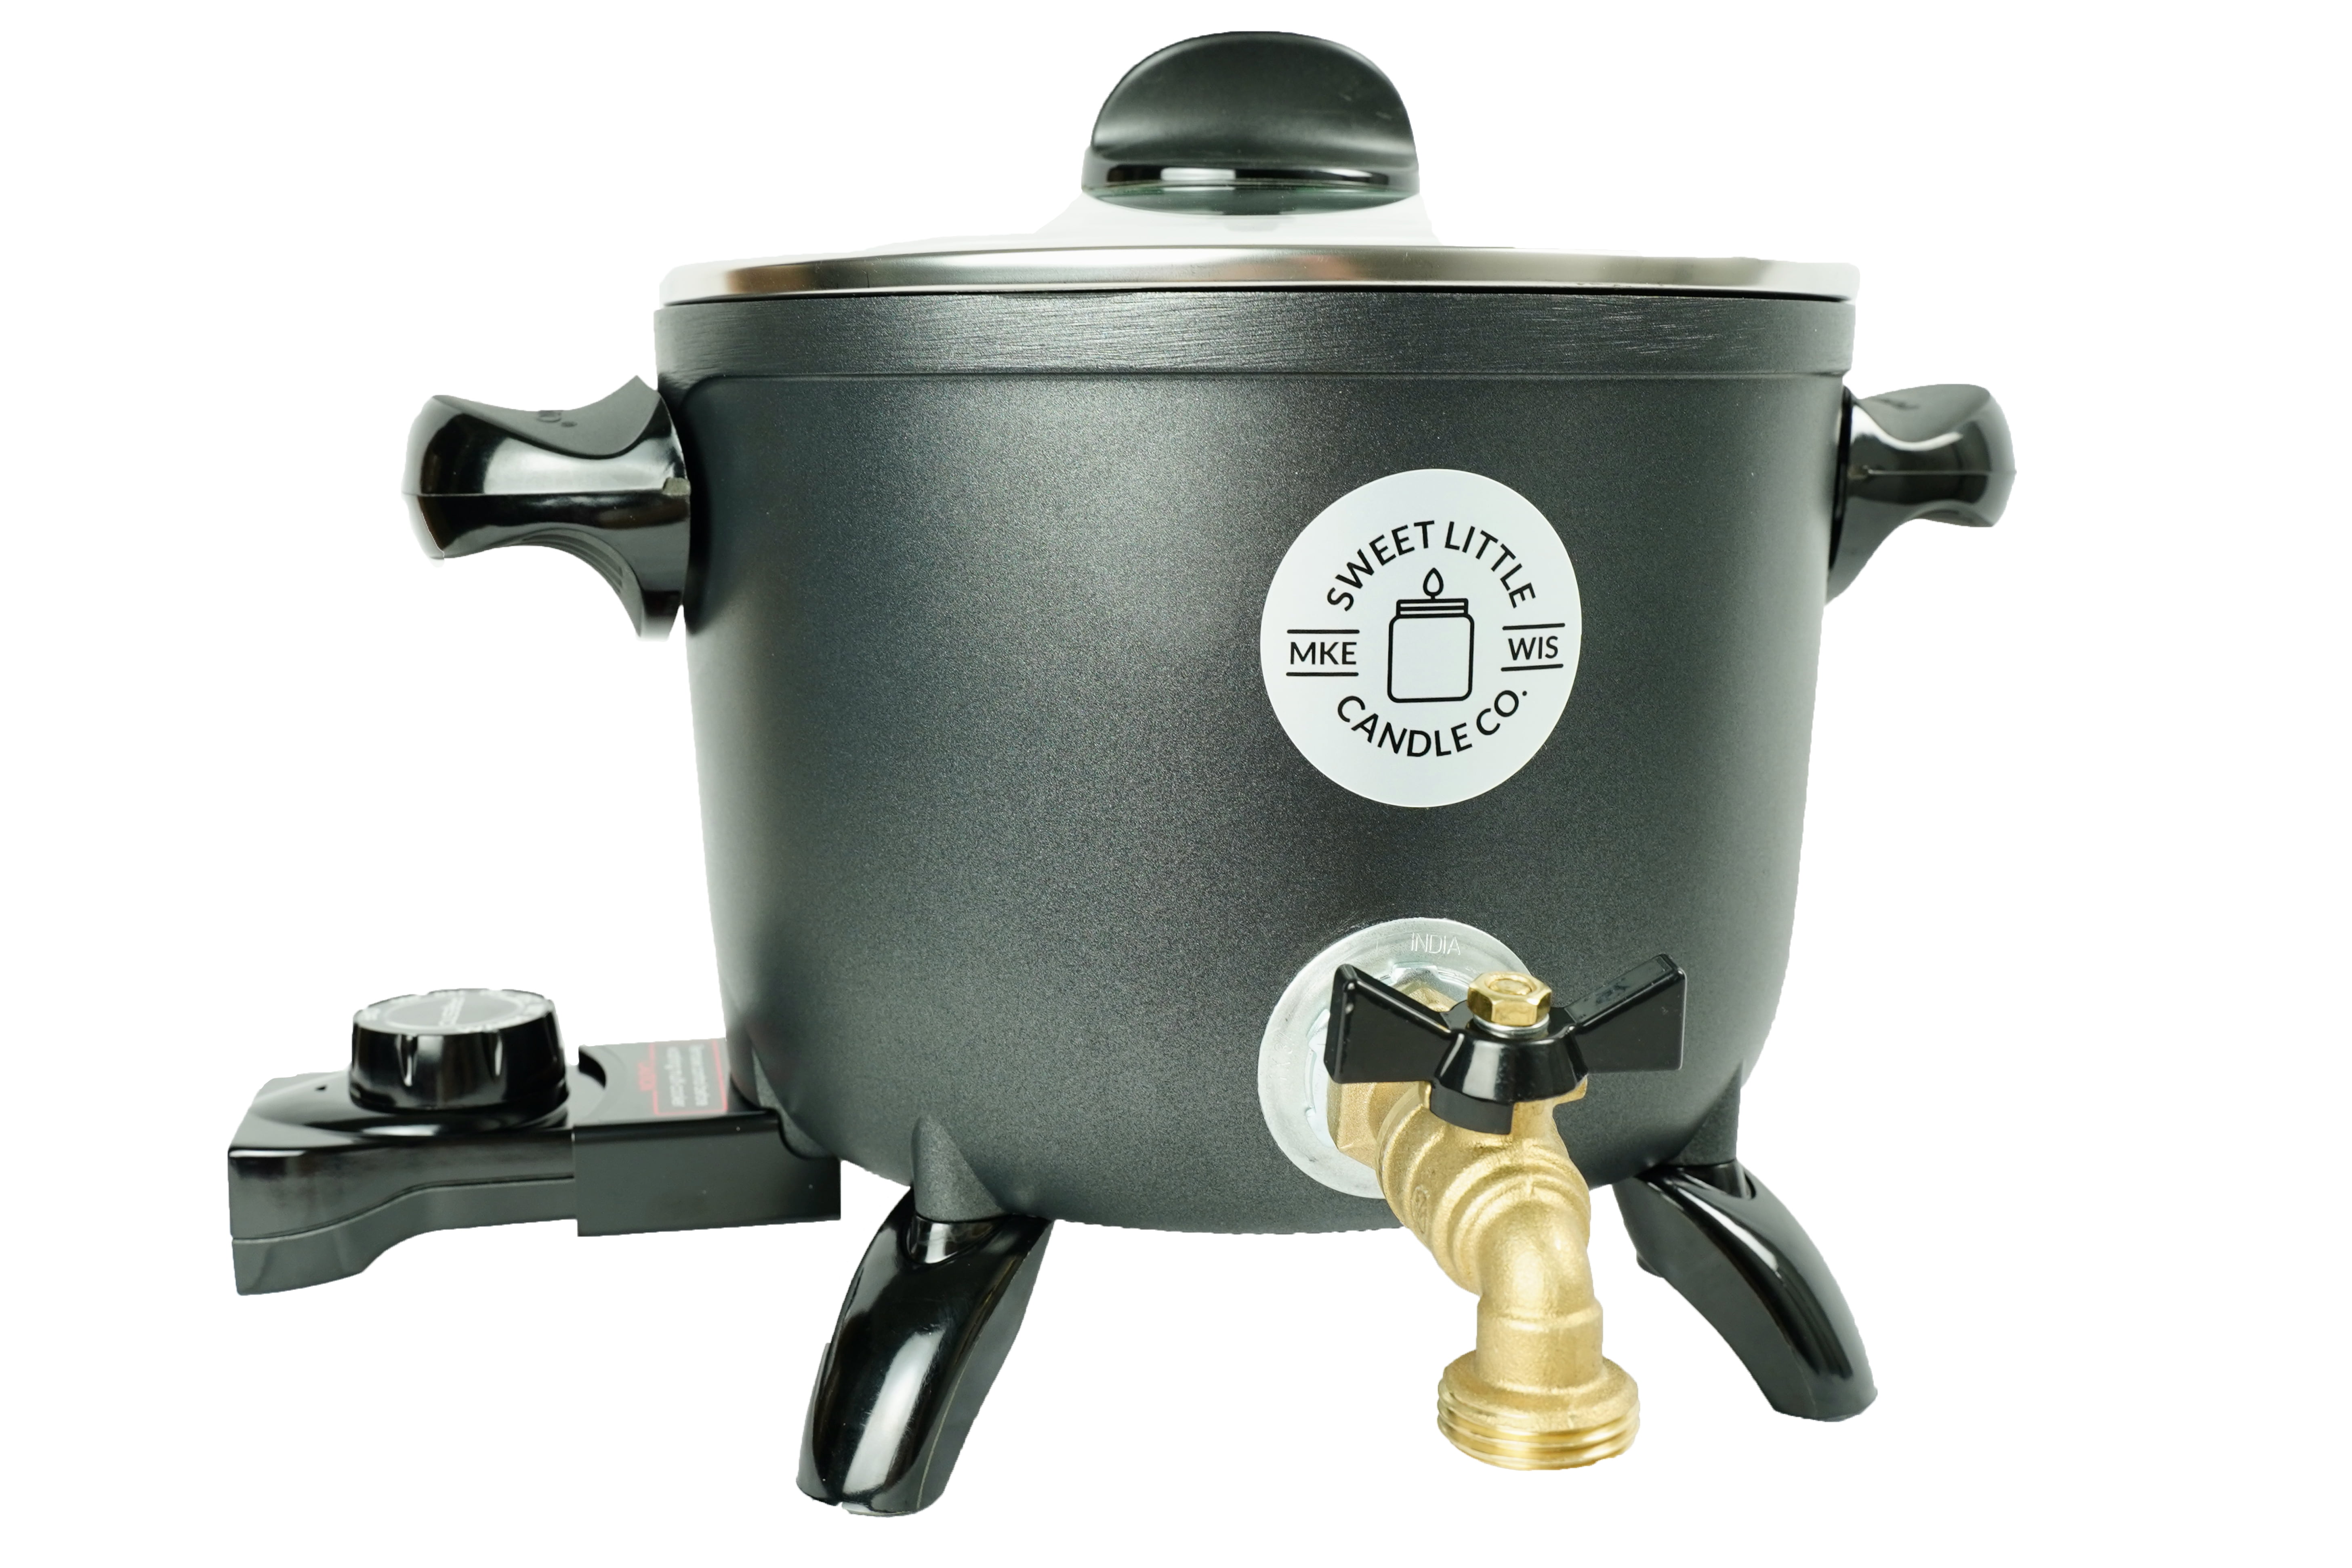 HUGE Candle Wax Melter, Presto Pot, Xx-large, 18lbs of Wax, Brass Fittings  